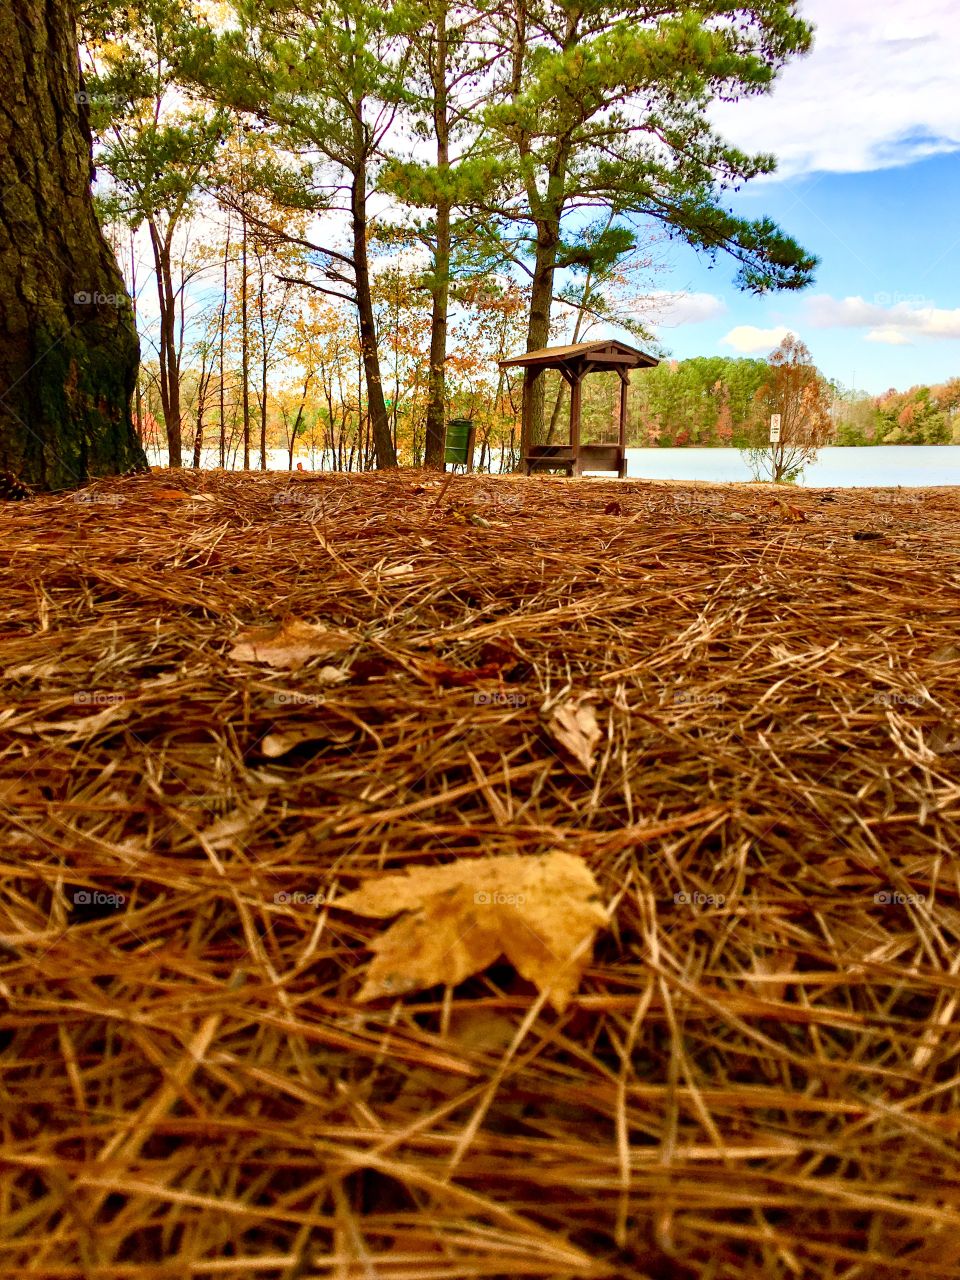 Pine straw and leaves at the lake